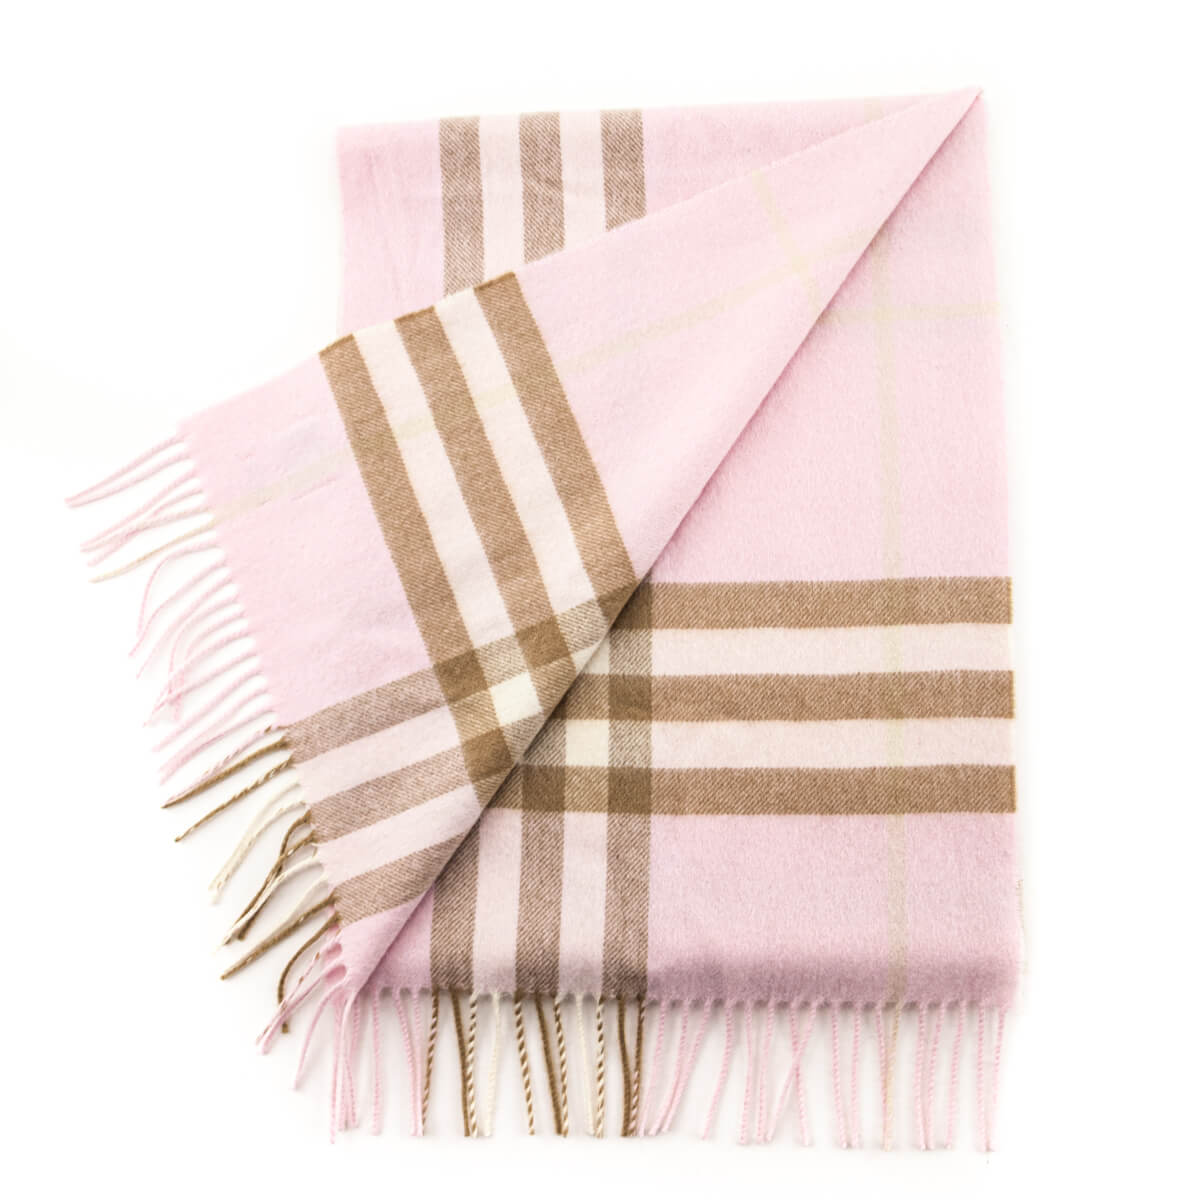 Burberry Pink Giant Check Cashmere Scarf - Love that Bag etc - Preowned Authentic Designer Handbags & Preloved Fashions